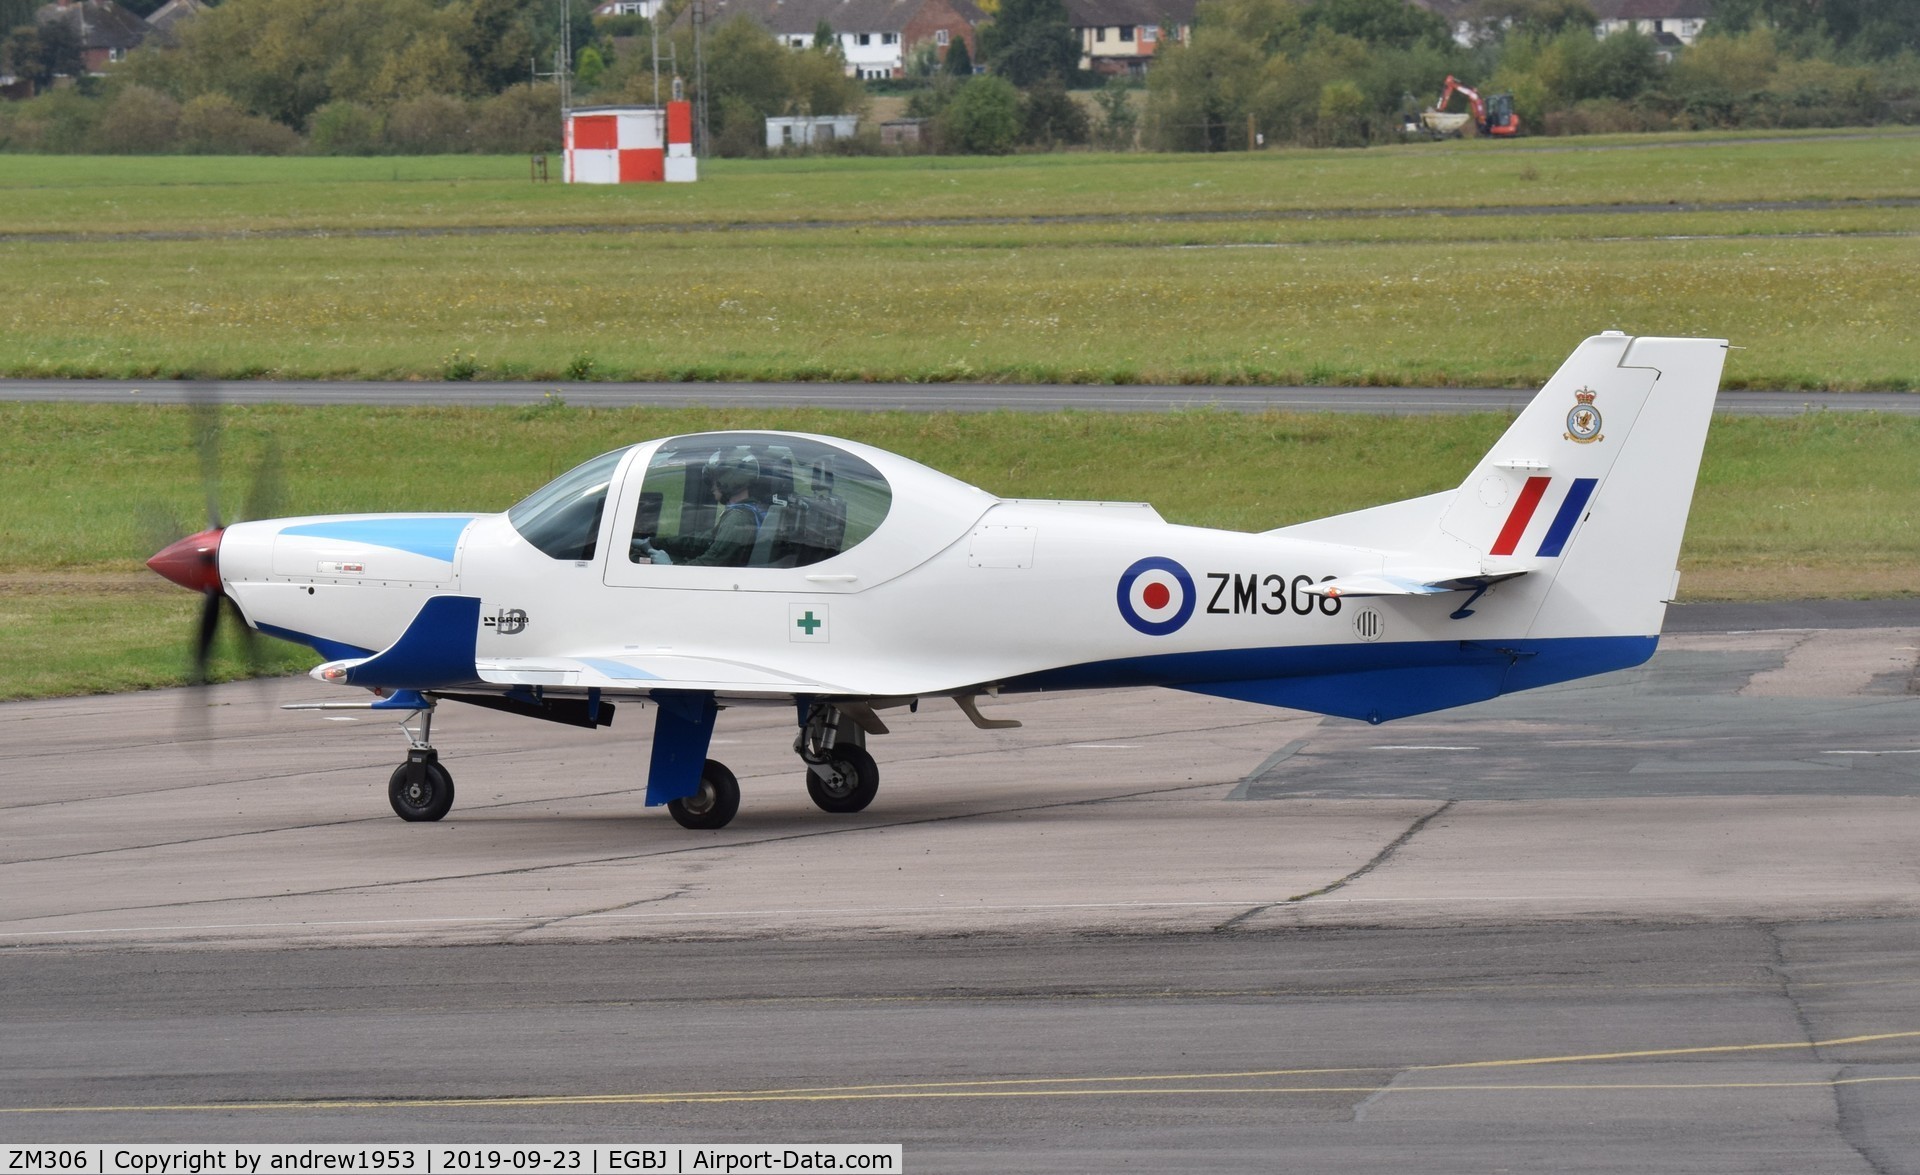 ZM306, 2016 Grob G120TP-A Prefect T1 C/N 11118, ZM306 at Gloucestershire Airport.